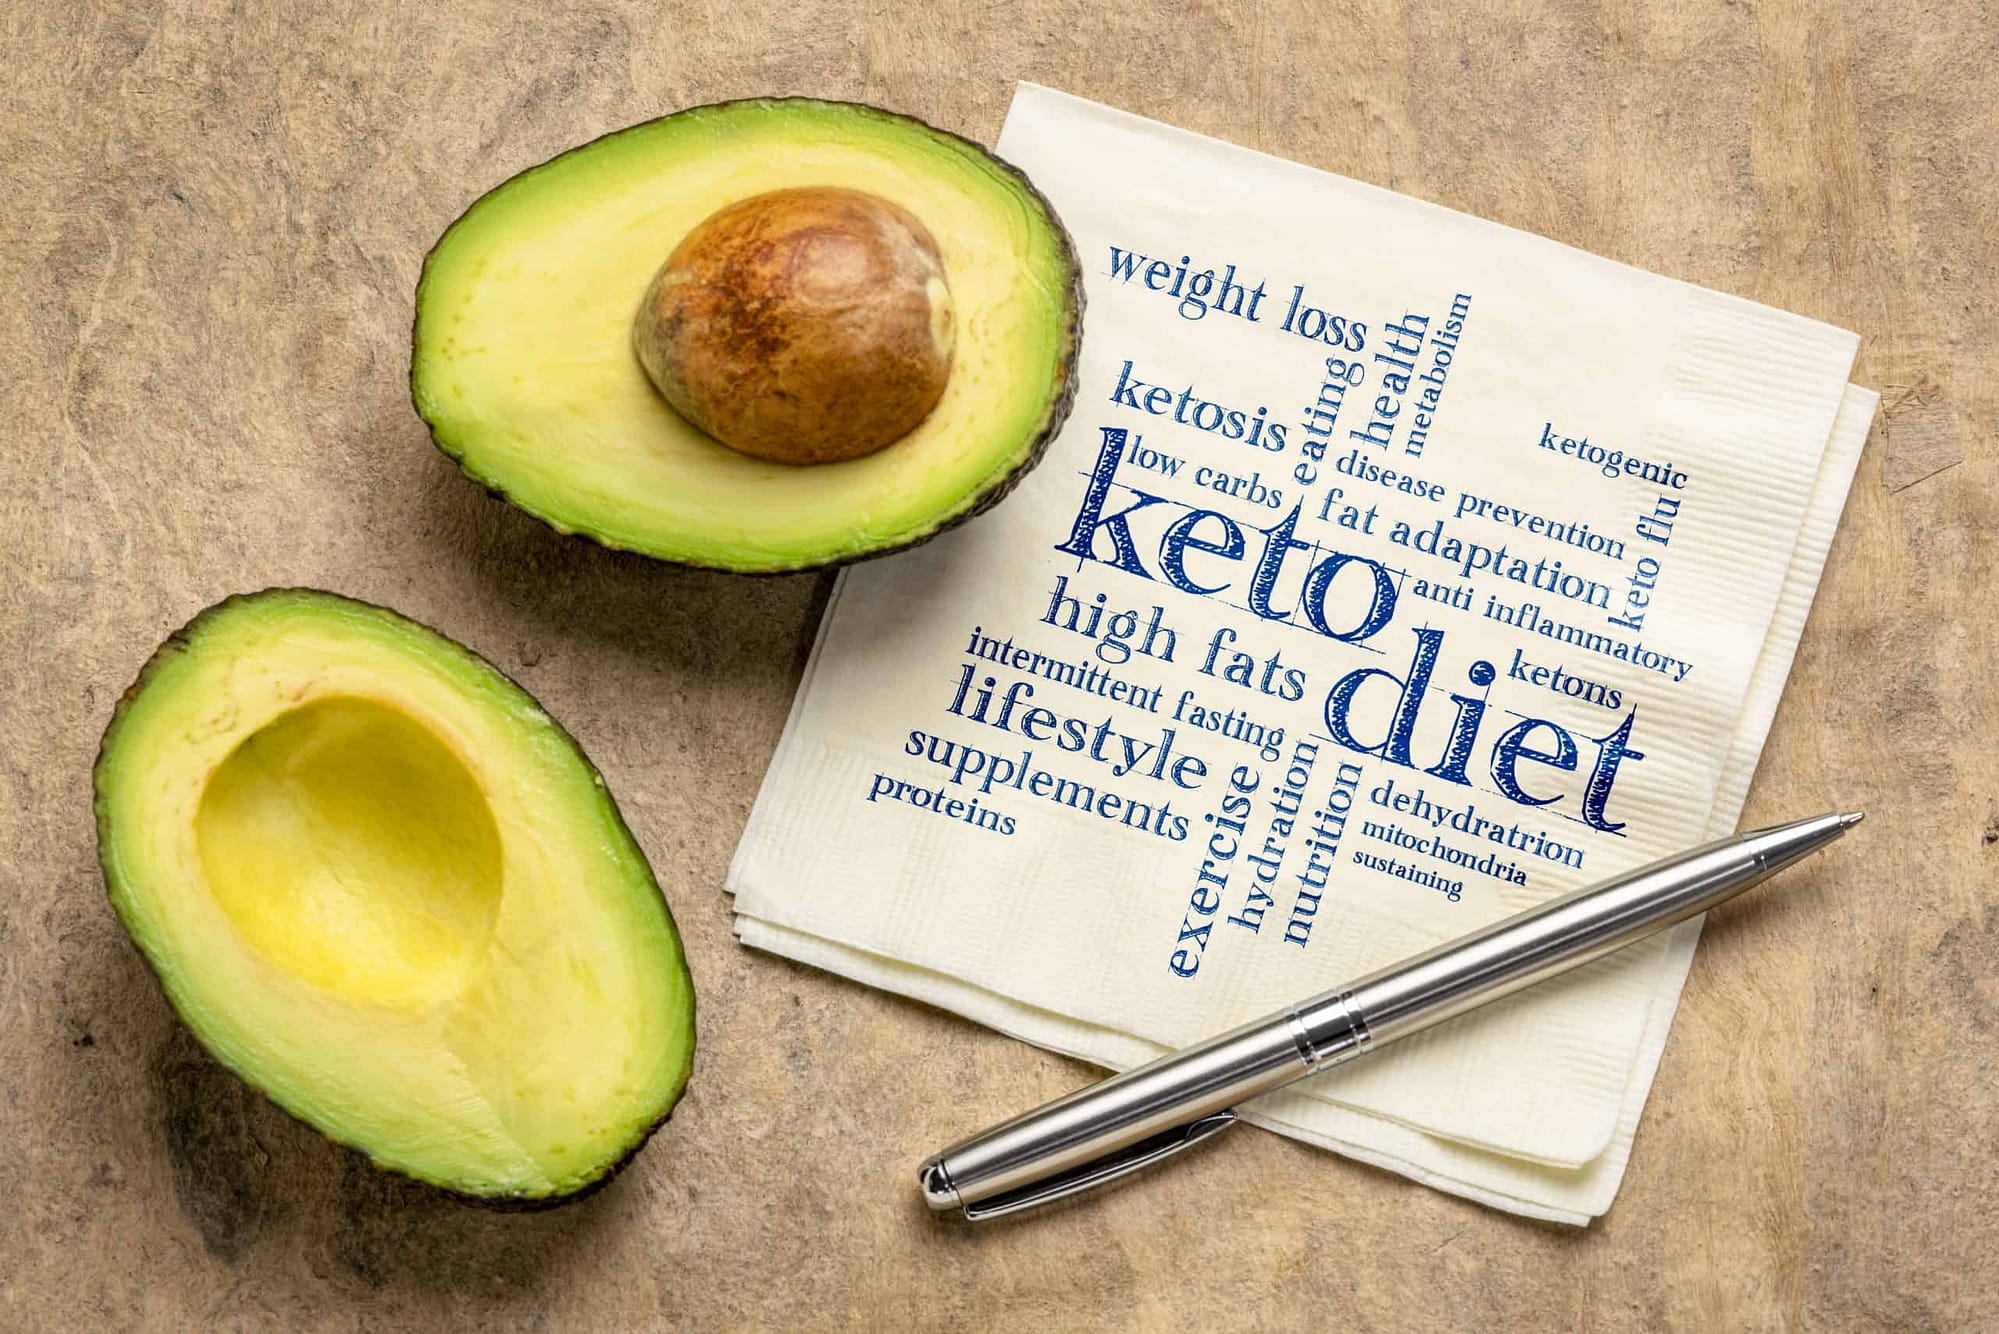 keto diet word cloud on napkin with a cut avocado on a table